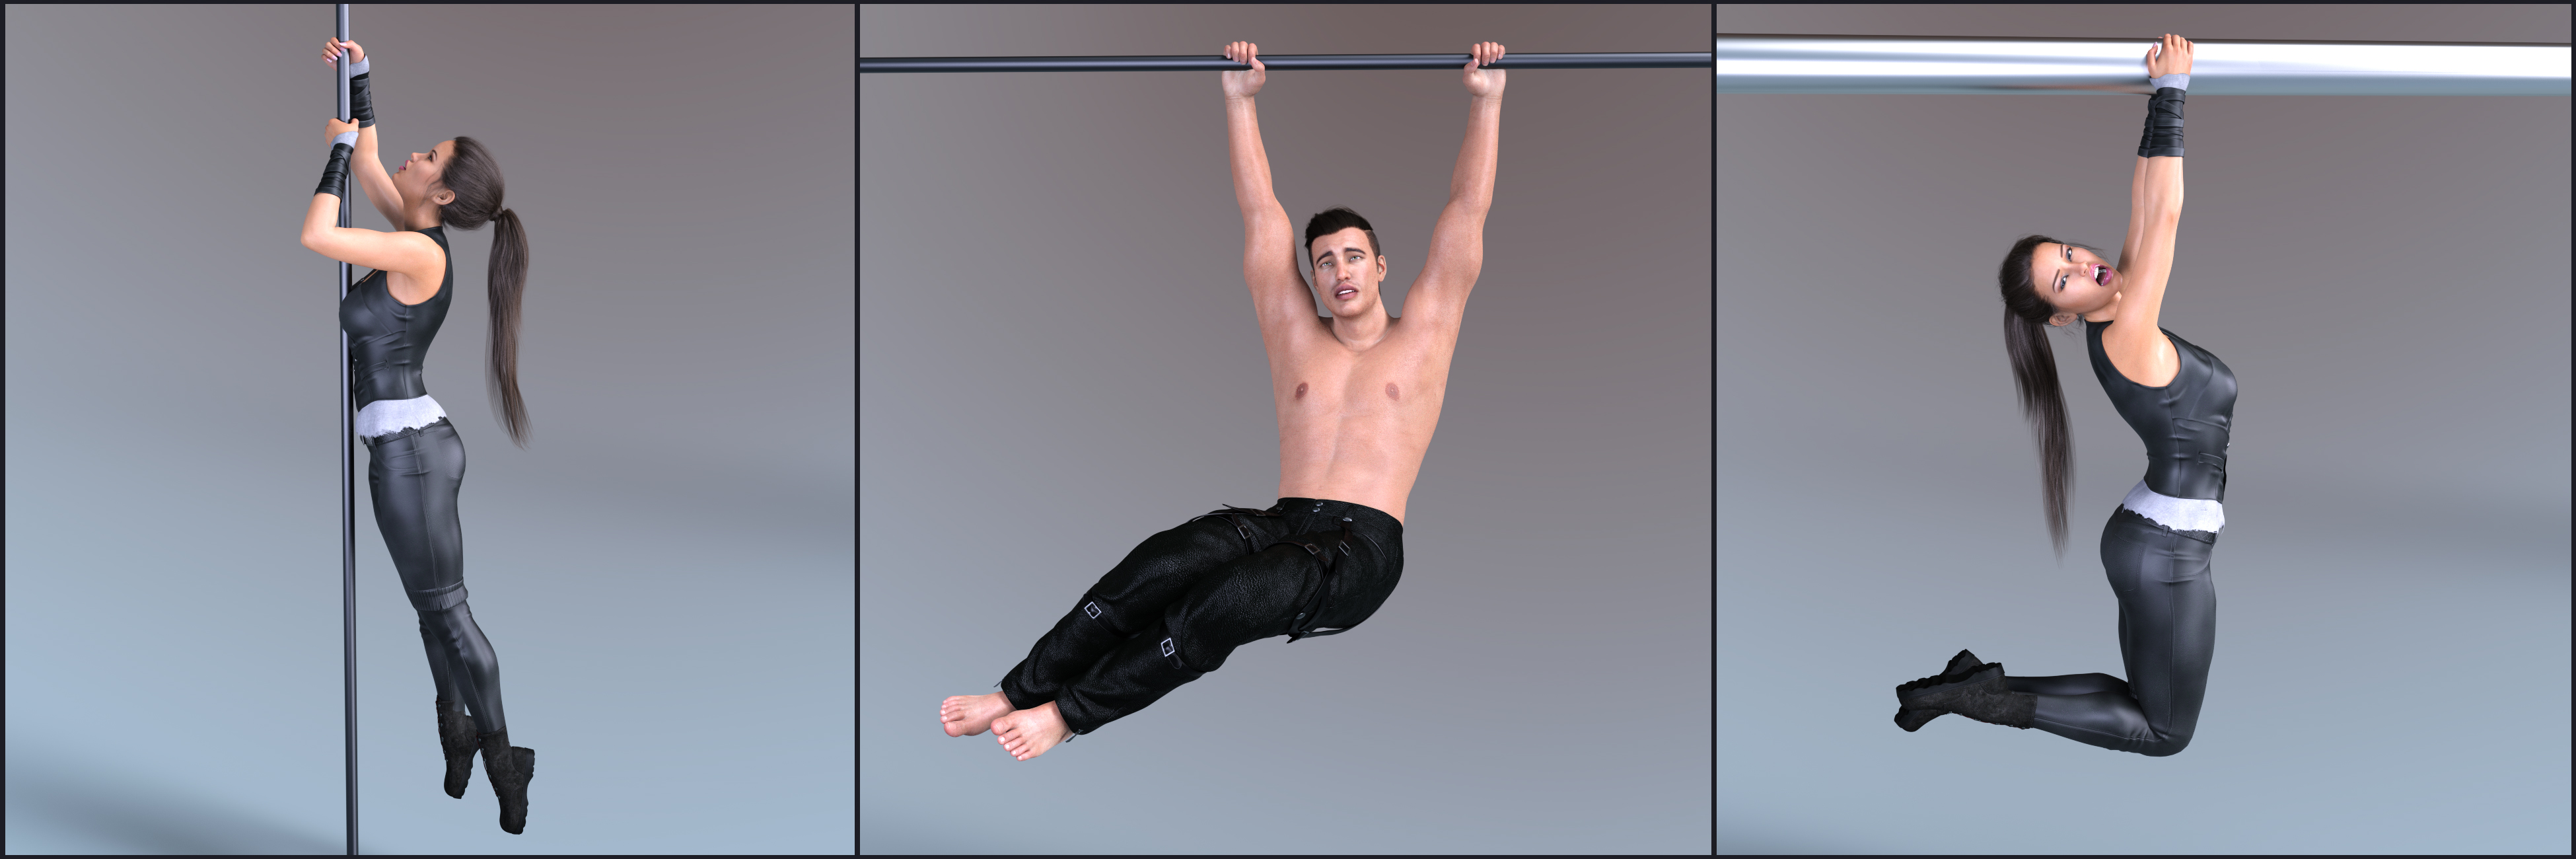 Z Utility Climbing and Hanging Poses for Genesis 3 and 8 by: Zeddicuss, 3D Models by Daz 3D